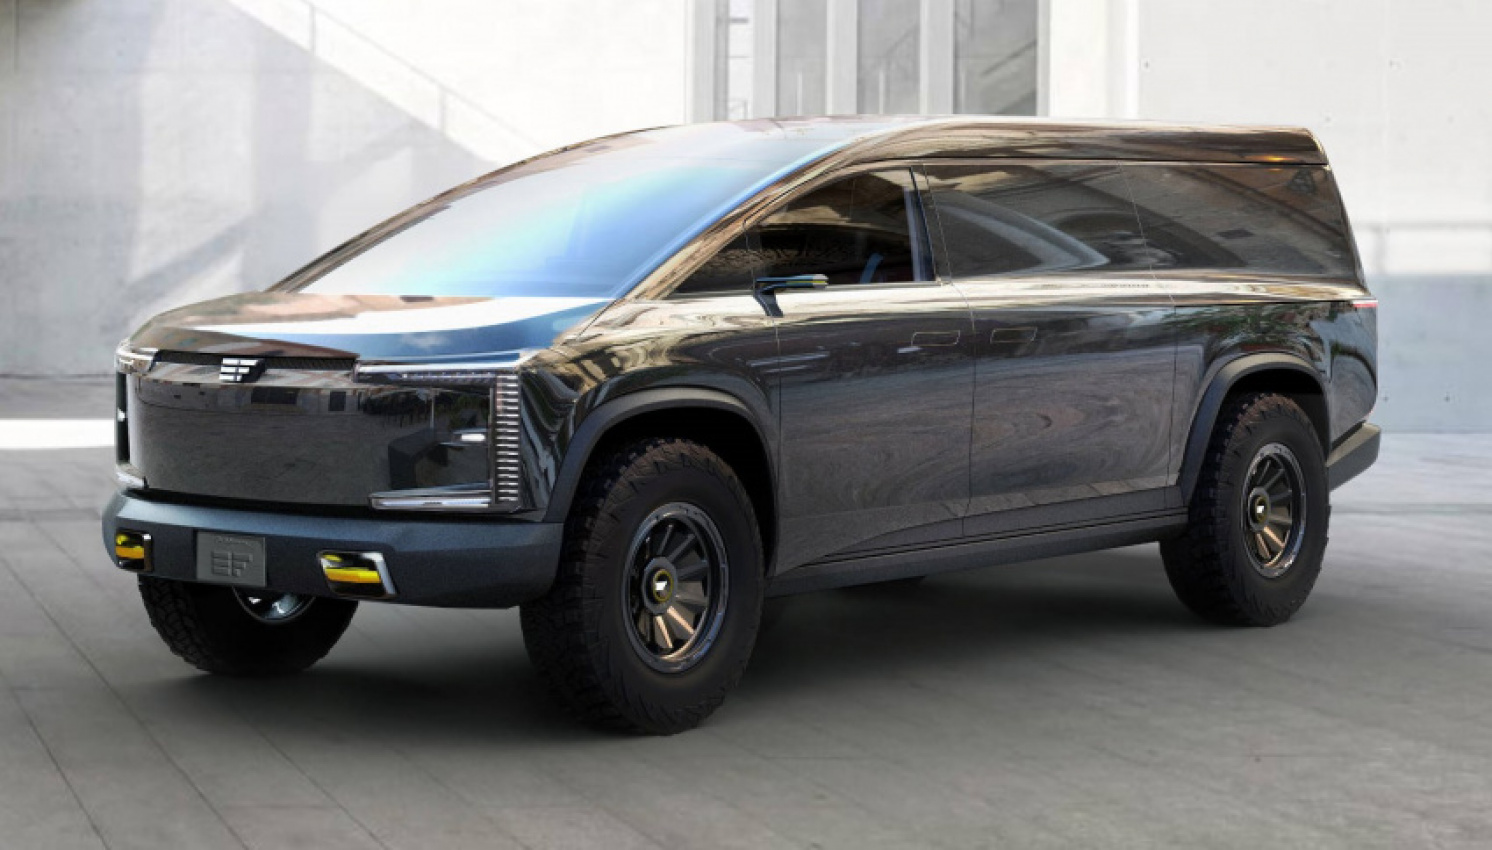 autos, cars, concept car, delivery van, design study, edisonfuture, icona design, phoenix motorcars, pick-up truck, spi energy, edisonfuture’s electric pick-up truck aims to grab a slice of future market